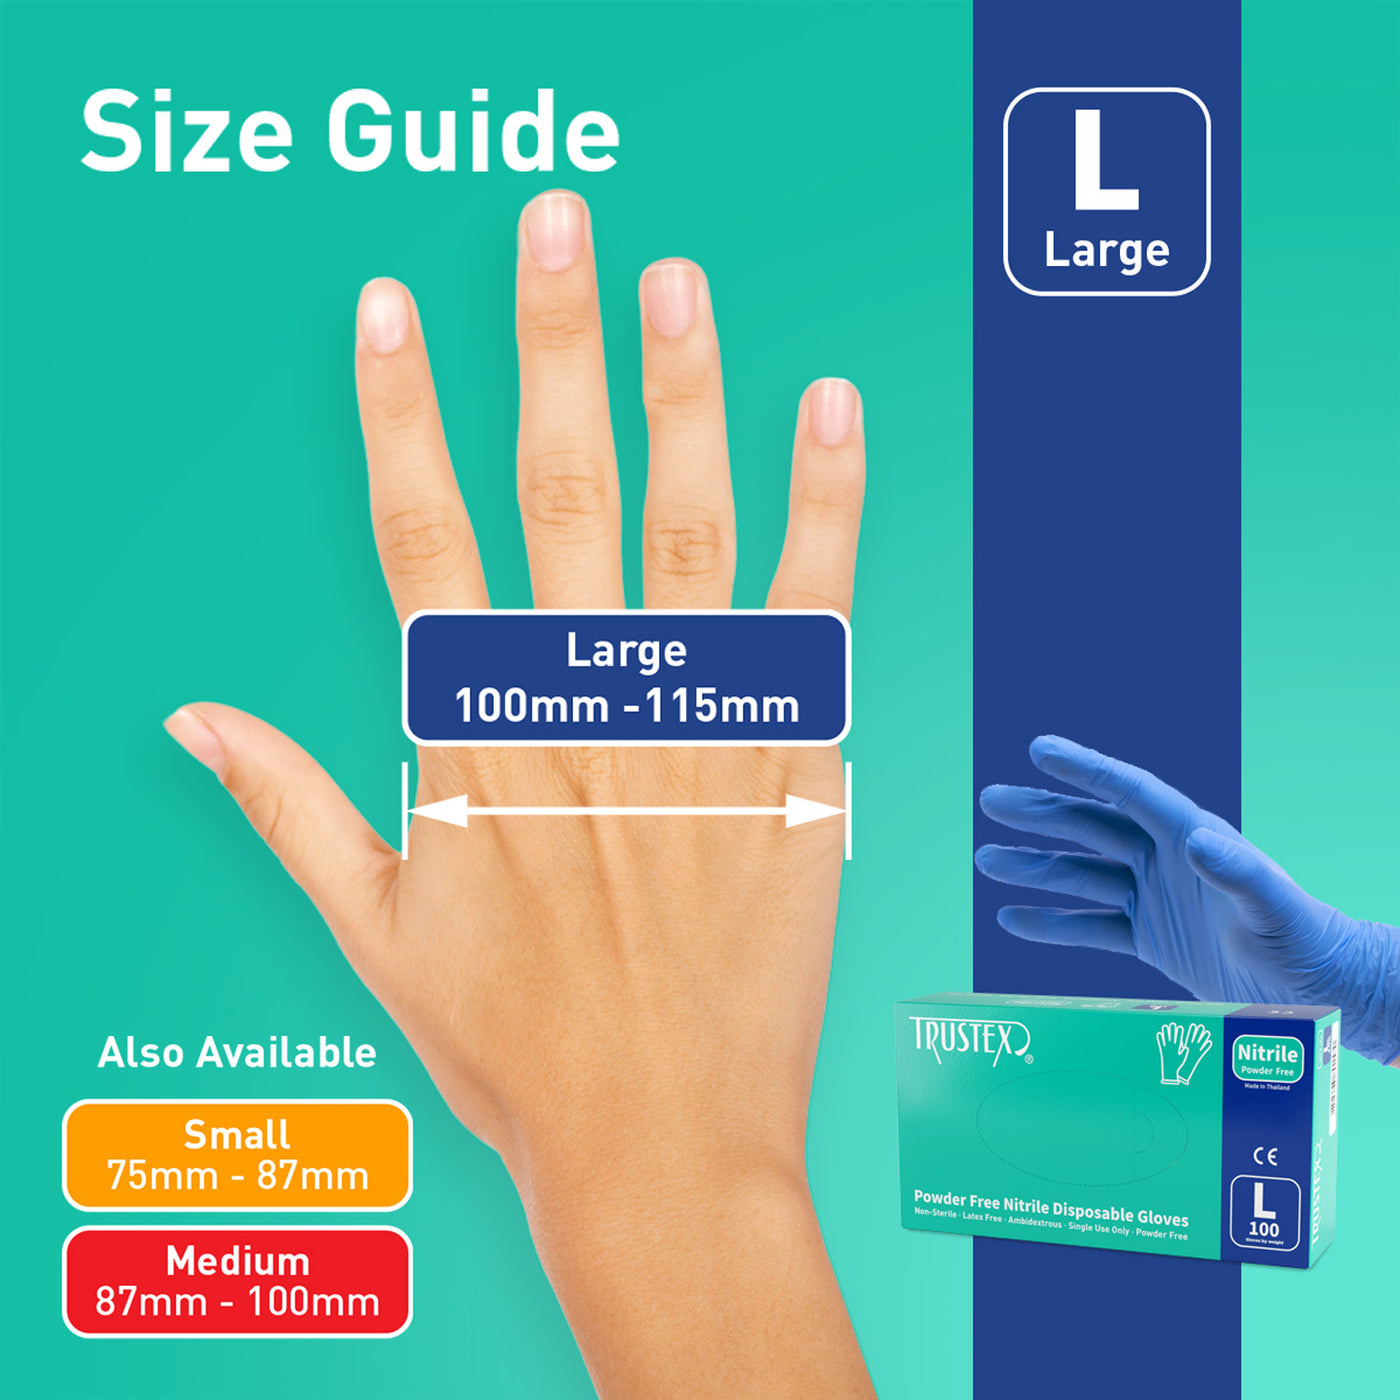 Trustex Nitrile Disposable Gloves | Powder Free | Case of 1,000 | Size Large